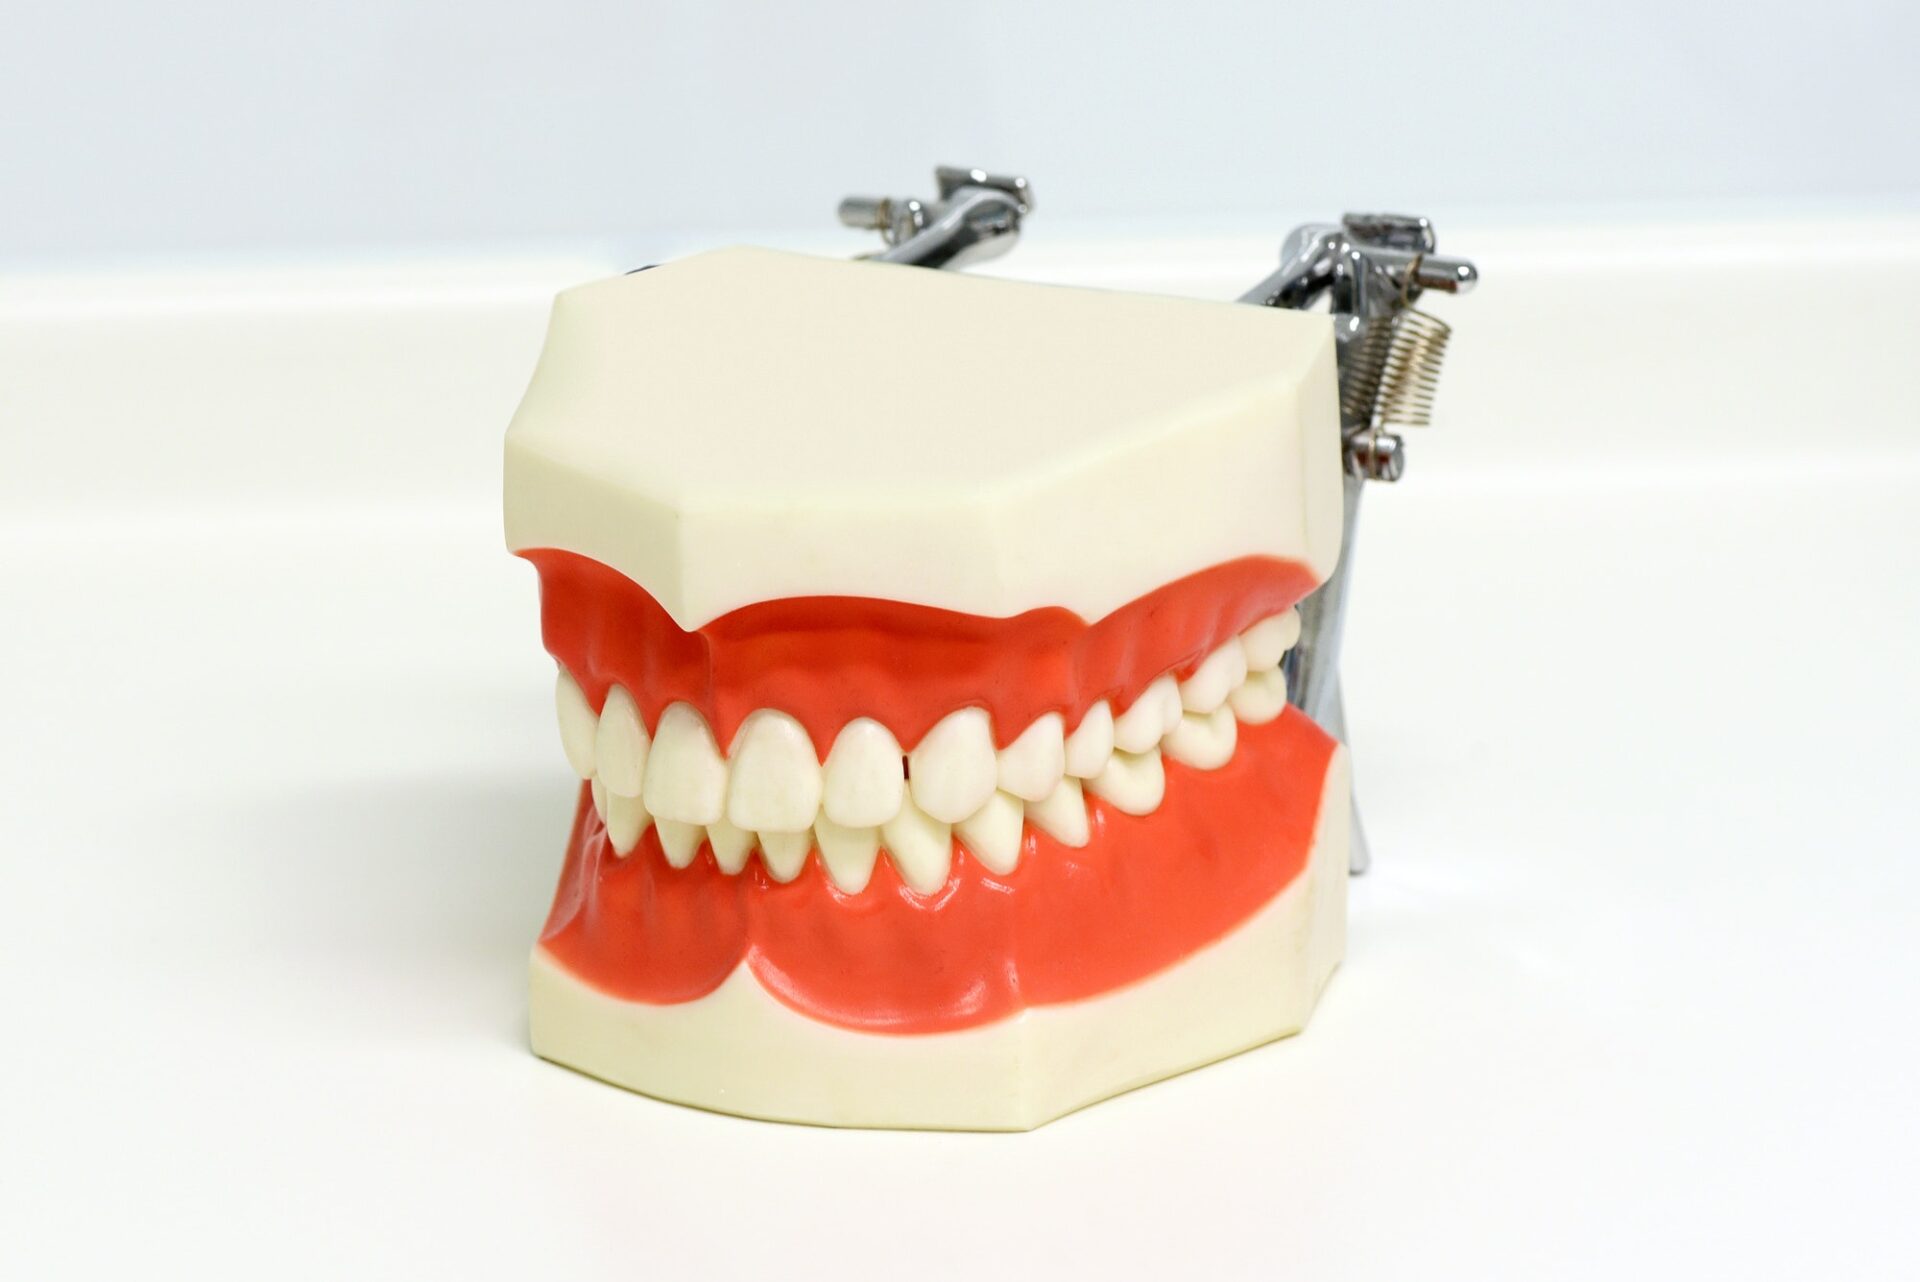 Crane & Seager orthodontics blog post Malocclusion - AKA a Bad Bite Dental model of upper and lower teeth orthodontics, living with braces, common treatments, orthodontist in lovelace colorado, orthodontist in ft. collins colorado, orthodontics for adults children and teens, invisalign in colorado, invisalign in ft. collins, co